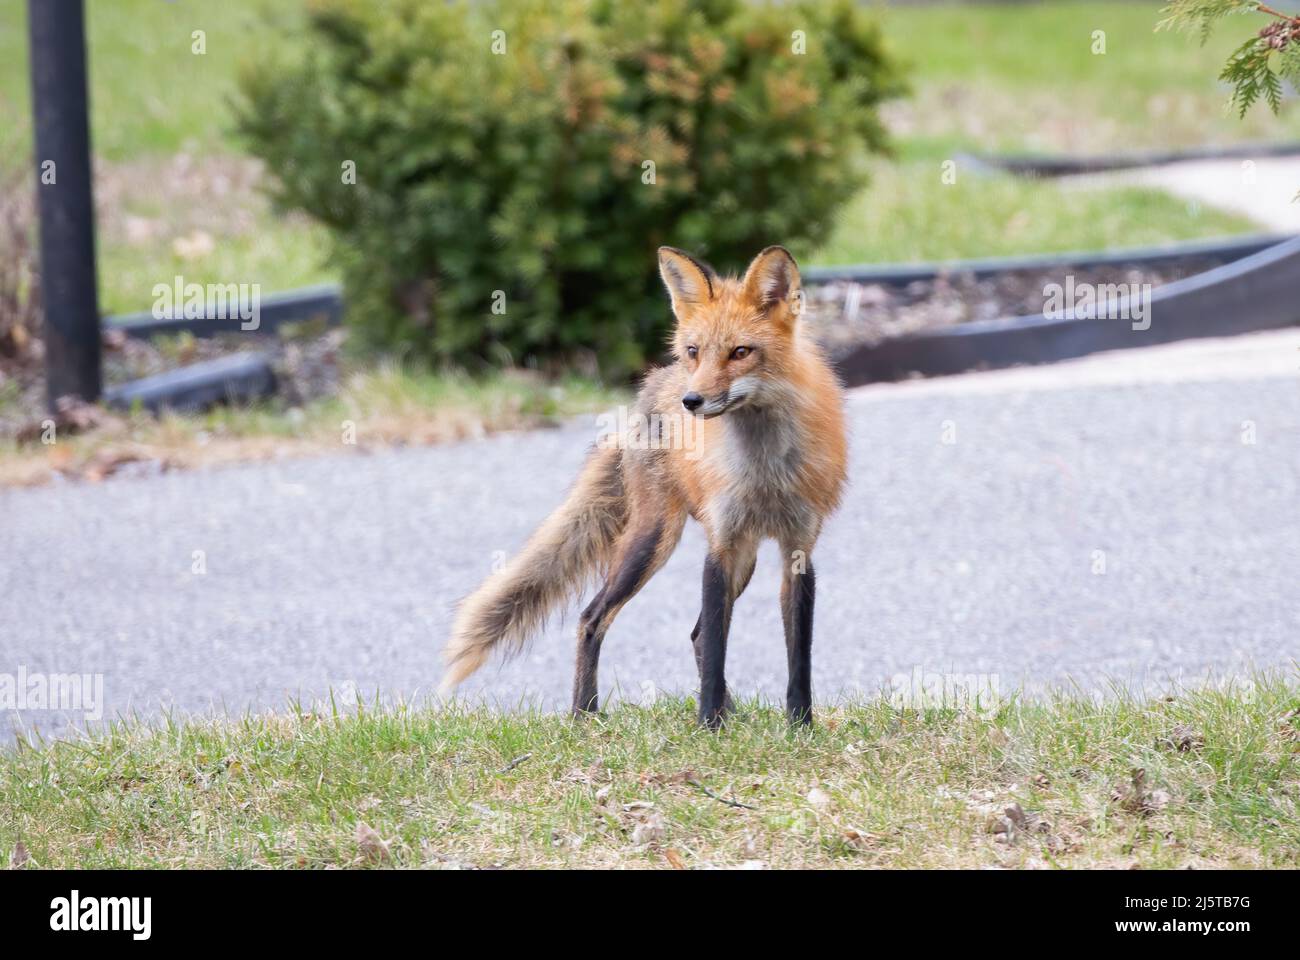 Red fox (Vulpes vulpes) with a bushy tail walking and looking back at me in my neighbourhood in spring in Ottawa, Canada Stock Photo